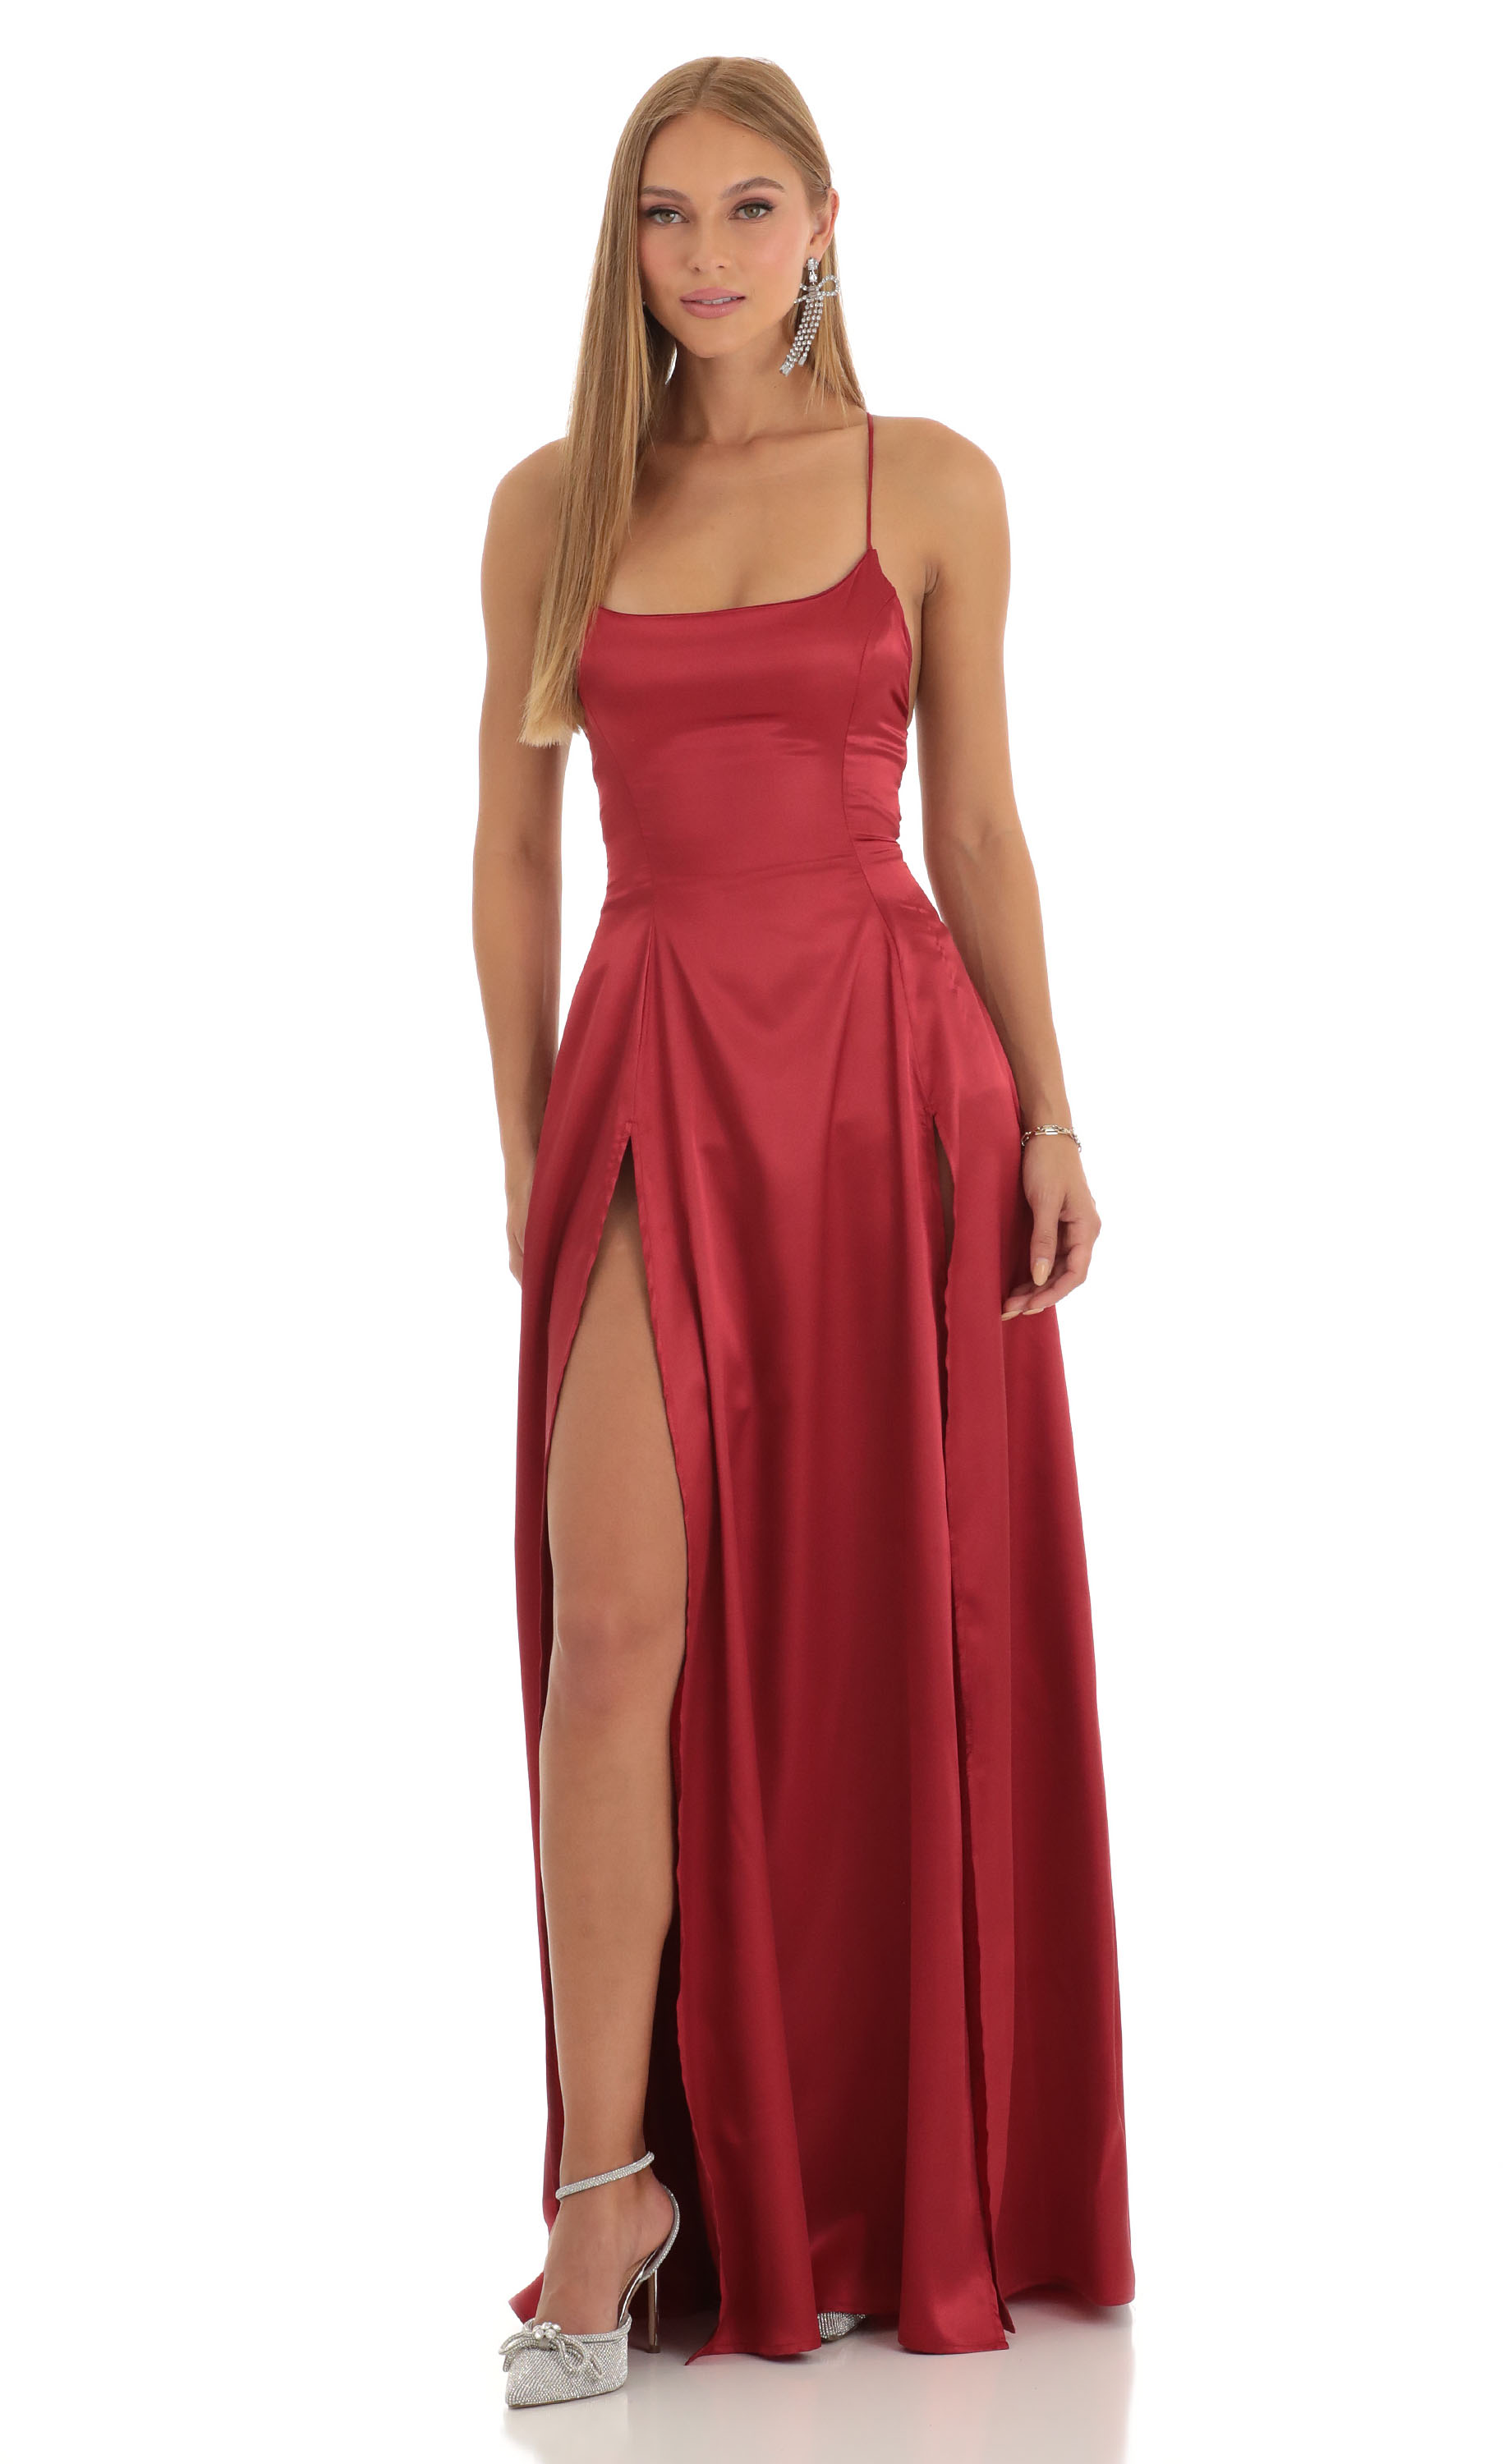 Slit Maxi Dress in Red